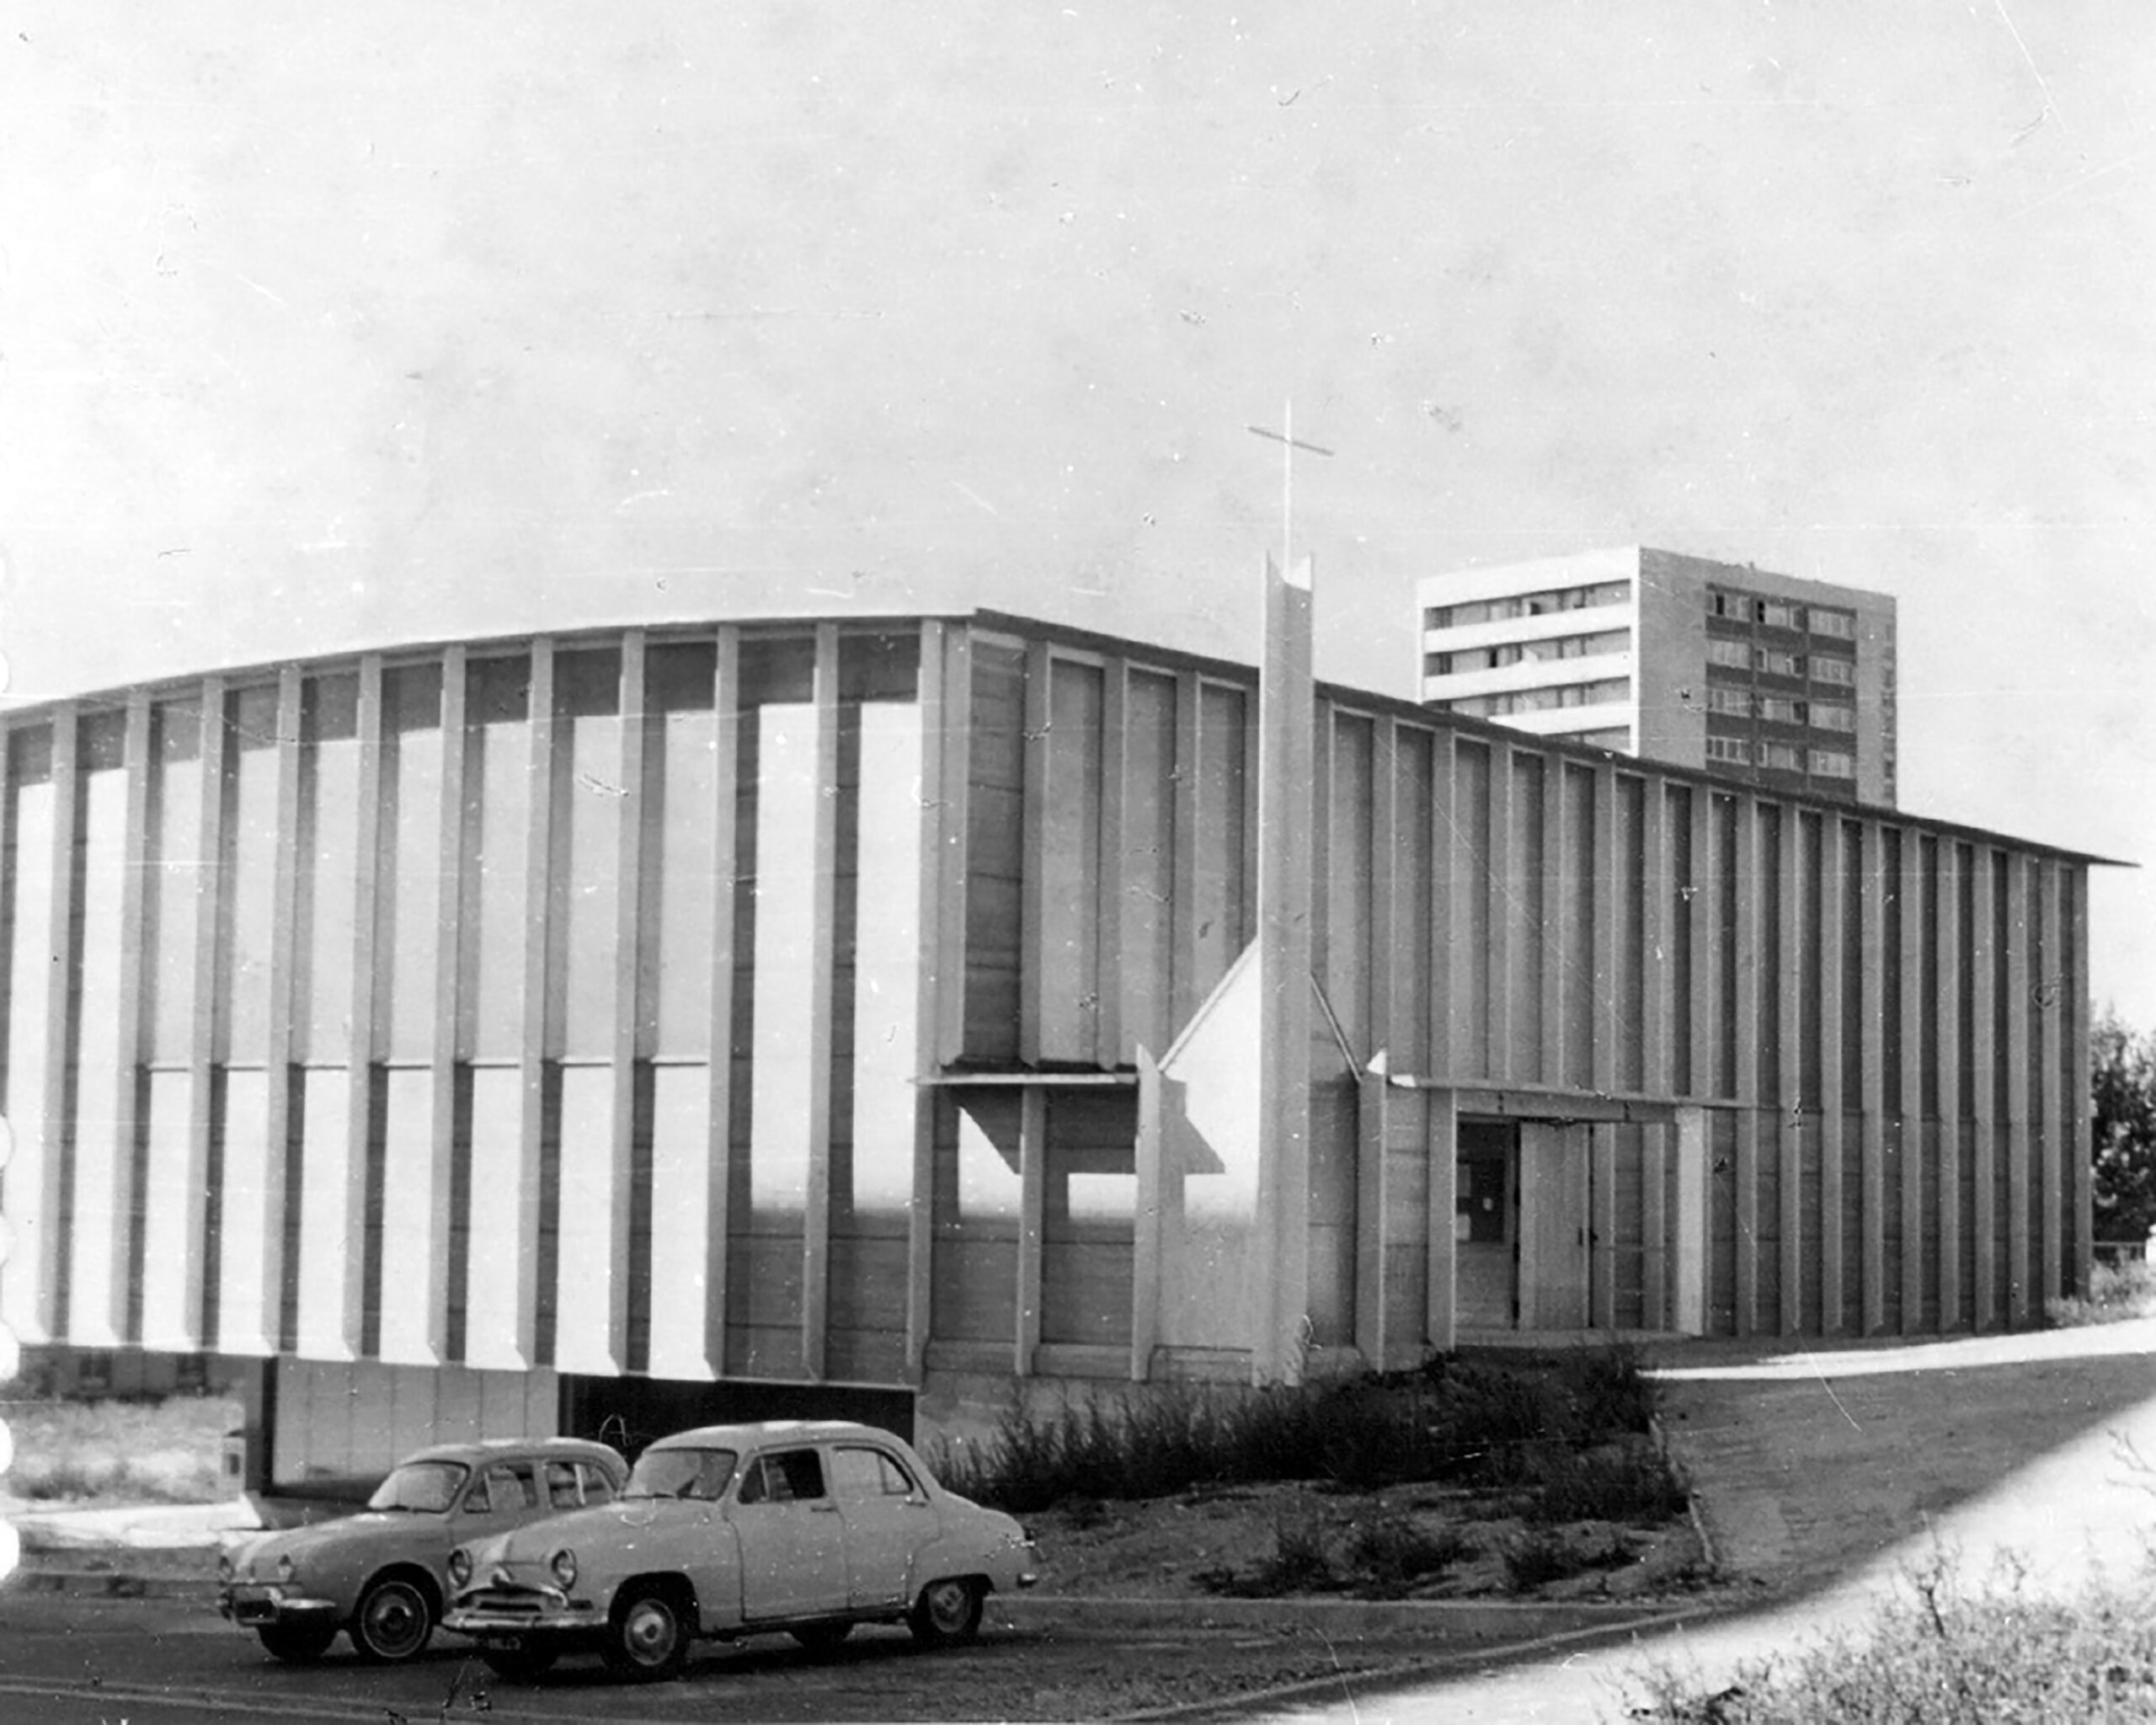 Saint-Paul church, L’Haÿ-les-Roses, 1963 (P. Picot, architect). Steel portal frames, plywood roof shaped covered with aluminum and folded sheet steel stiffeners.